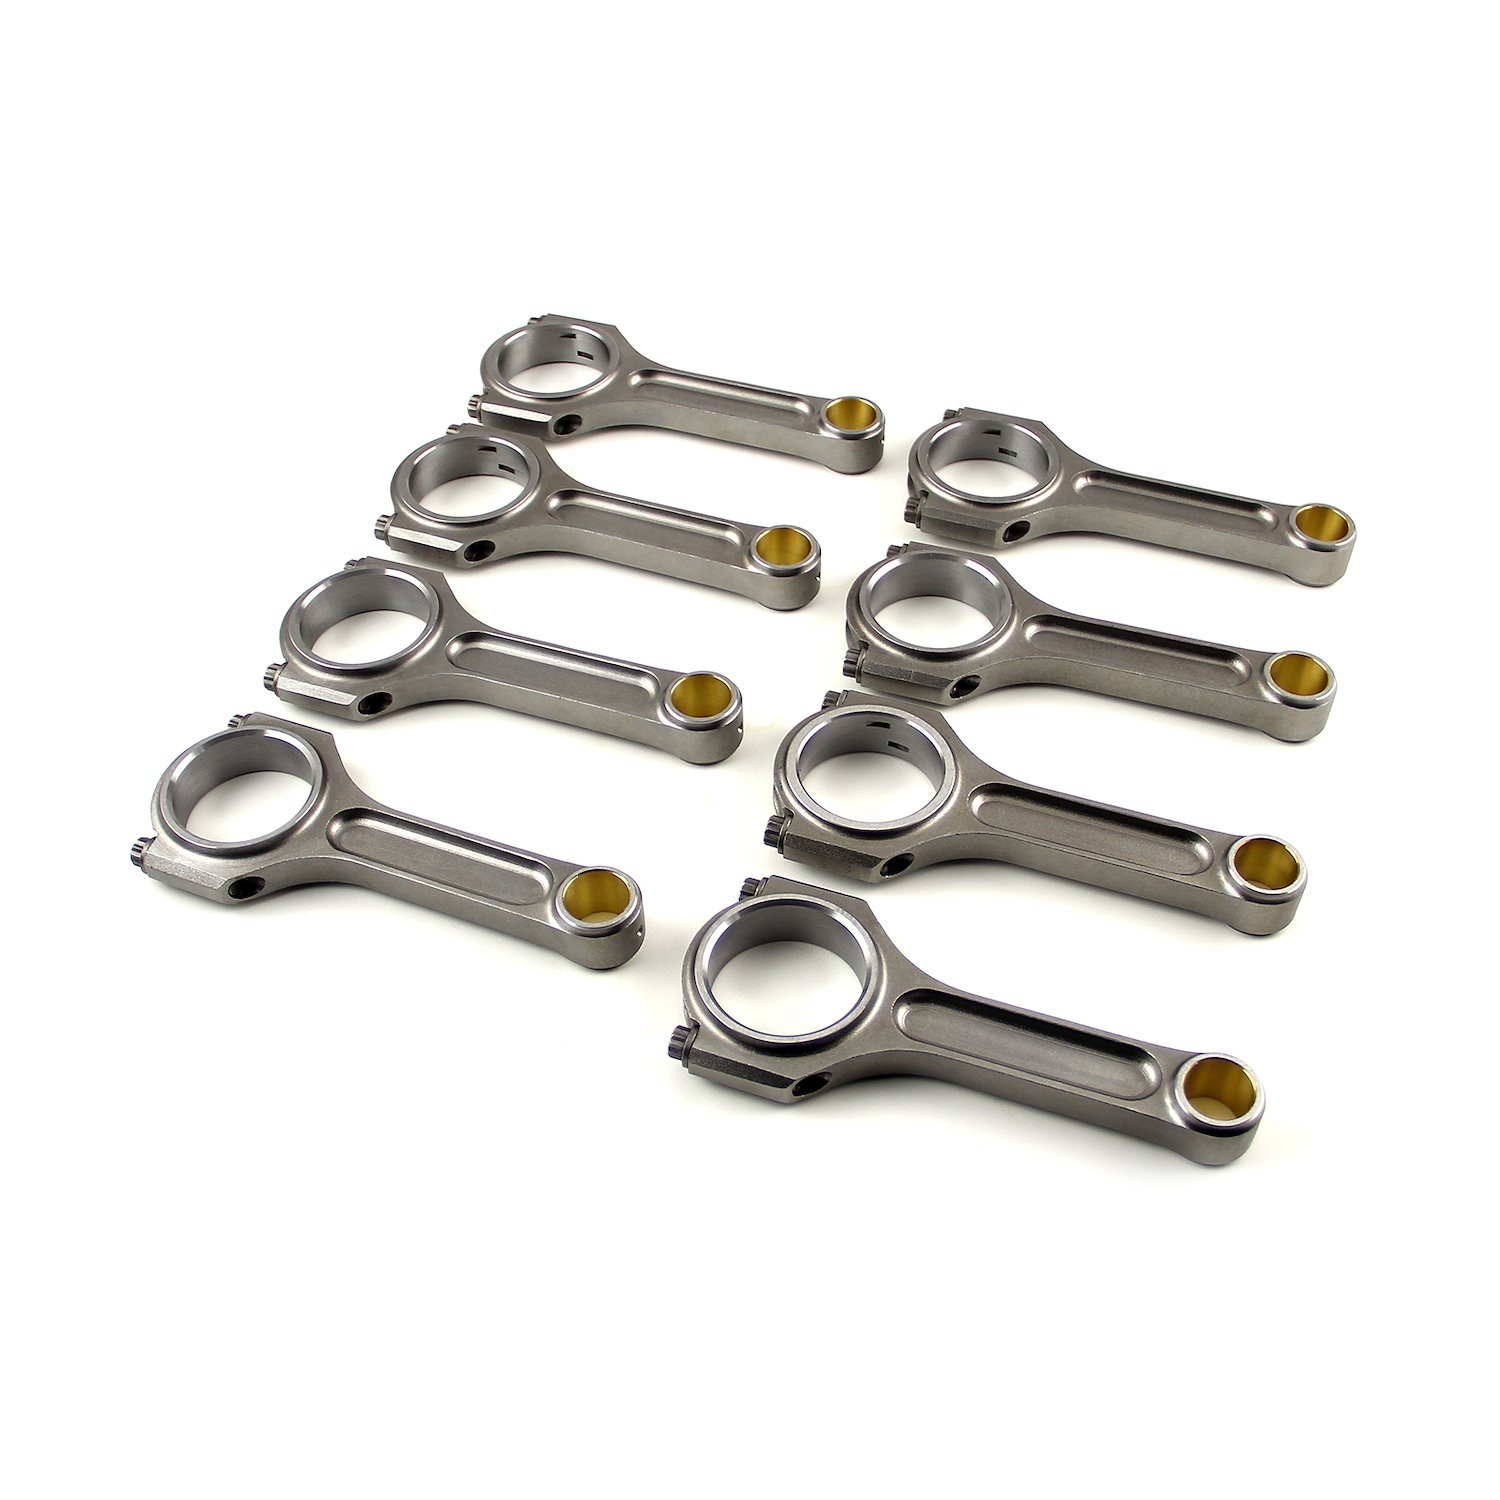 I Beam Race 5.400 2.123 .912 Bronze Bush 4340 Connecting Rods - Ford 302